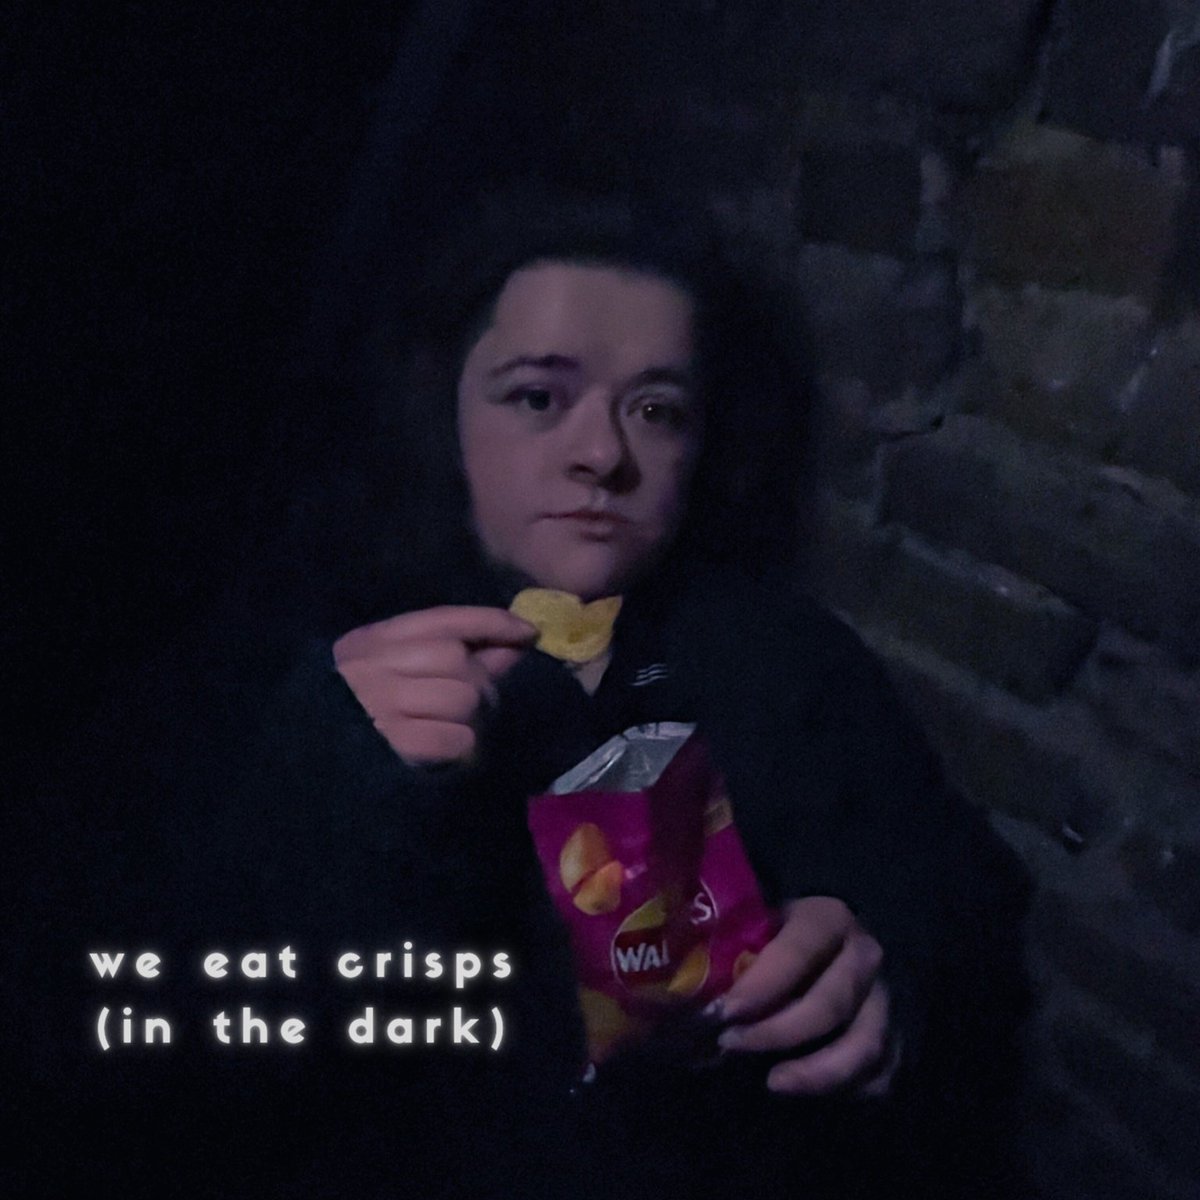 THANK YOU FOR EATING CRISPS IN THE DARK WITH US! It was a gorgeous time last night - a super enthusiastic sell out crowd! We really felt the love 🌟 We'll be busy working on next steps and development - please feel free to DM us any feedback! Kieran and Rachel will return 🖤